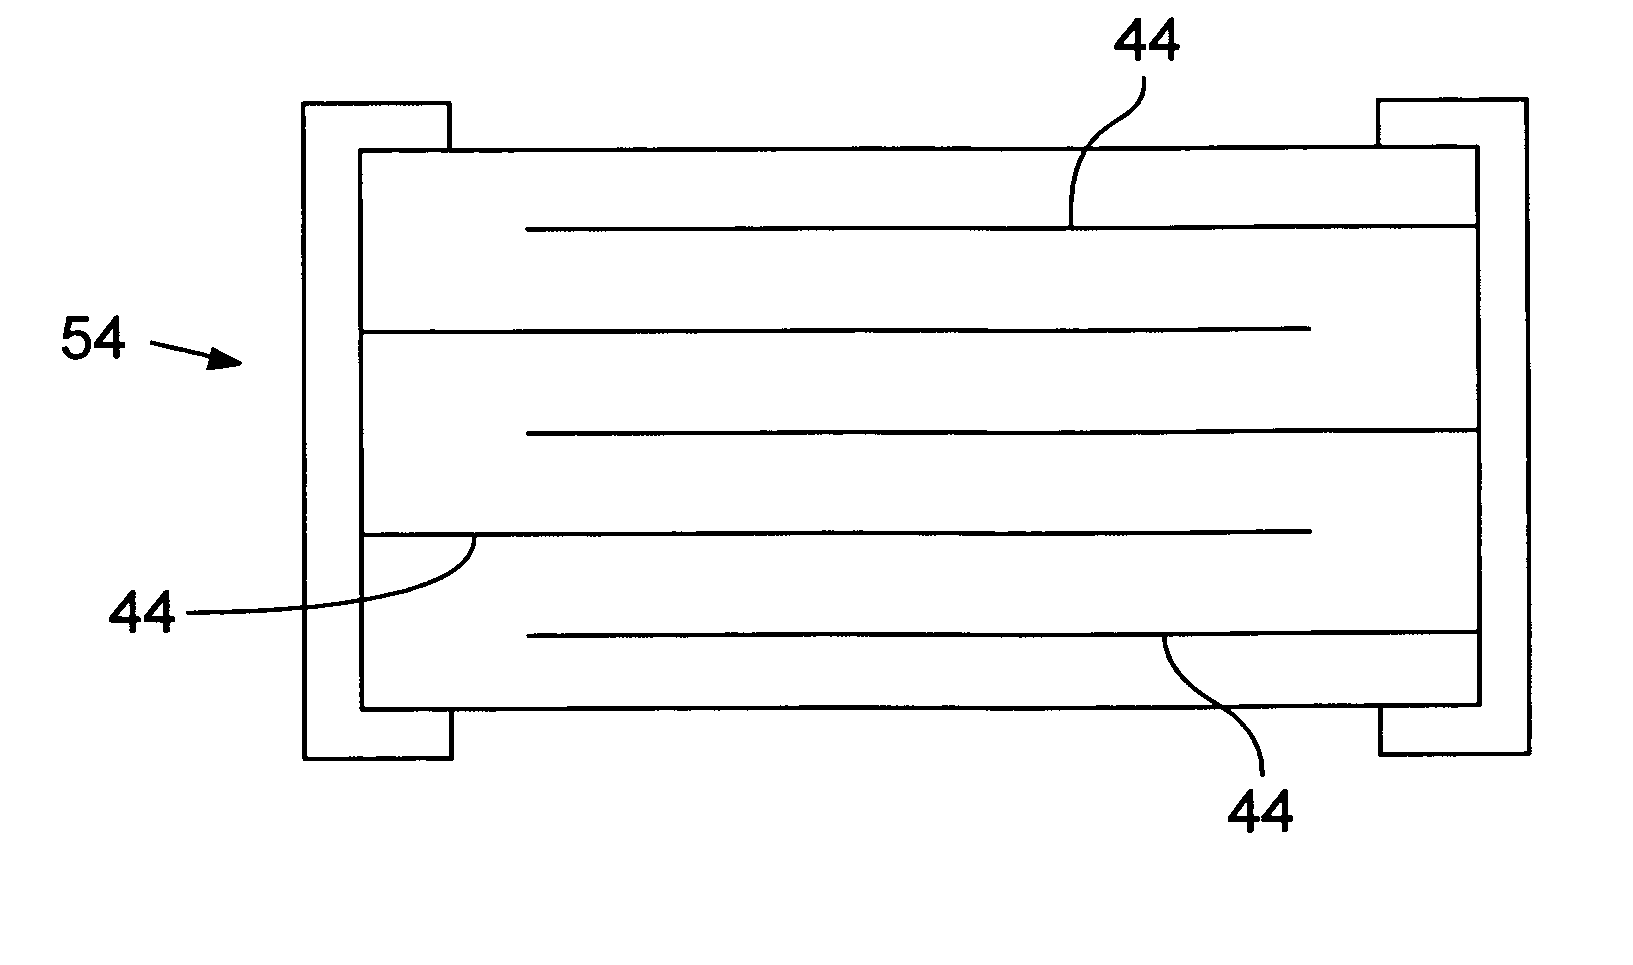 Method of forming passive electronic components on a substrate by direct write technique using shaped uniform laser beam